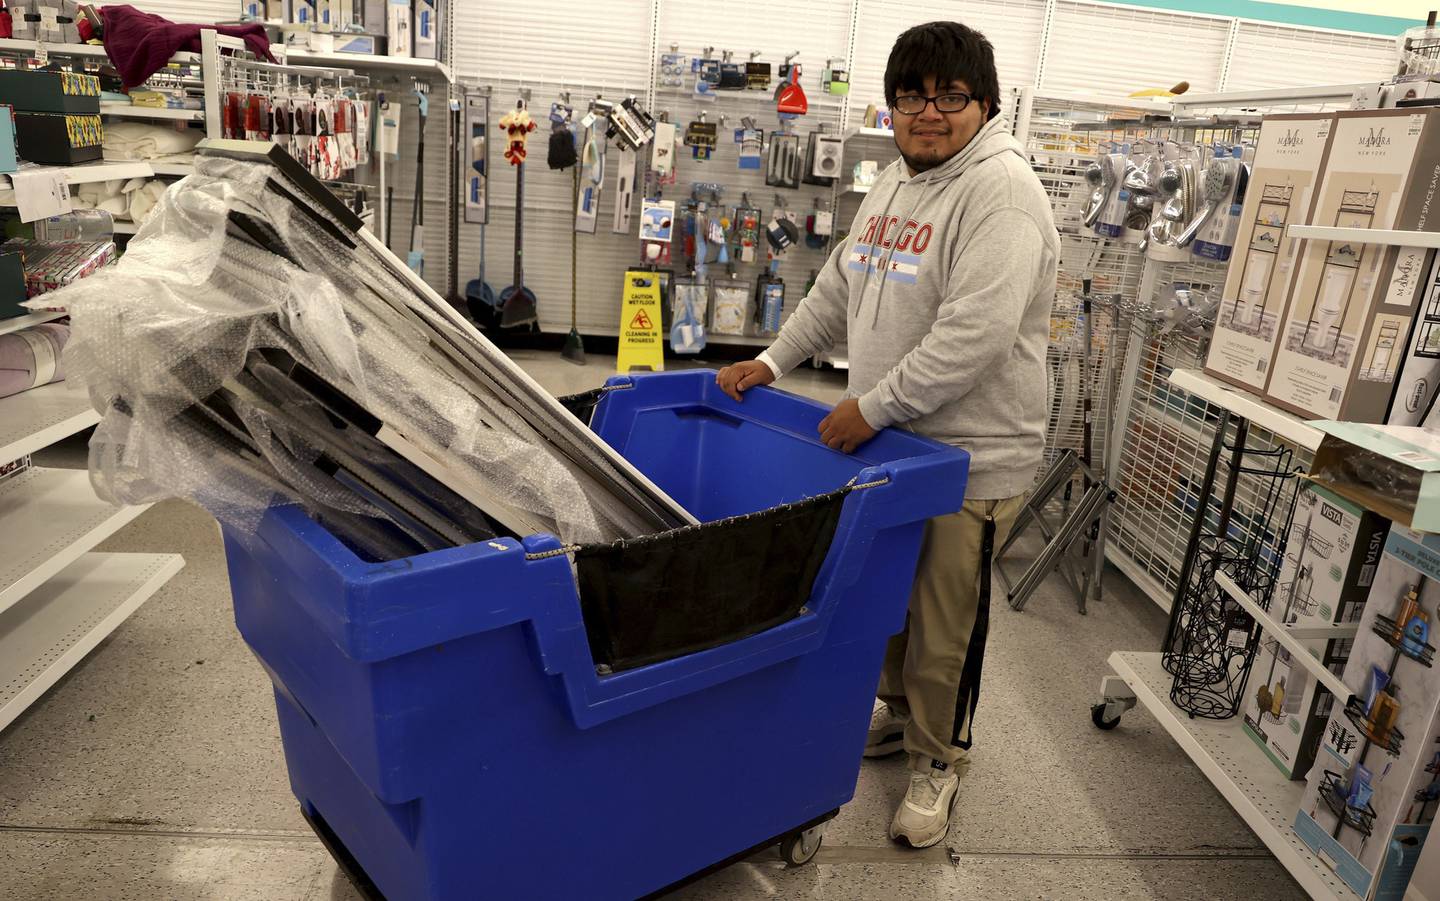 Alejandro Sanchez wheels several wall mirrors to shelves at his job at dd’s Discounts store in Cicero on Oct. 3, 2022  